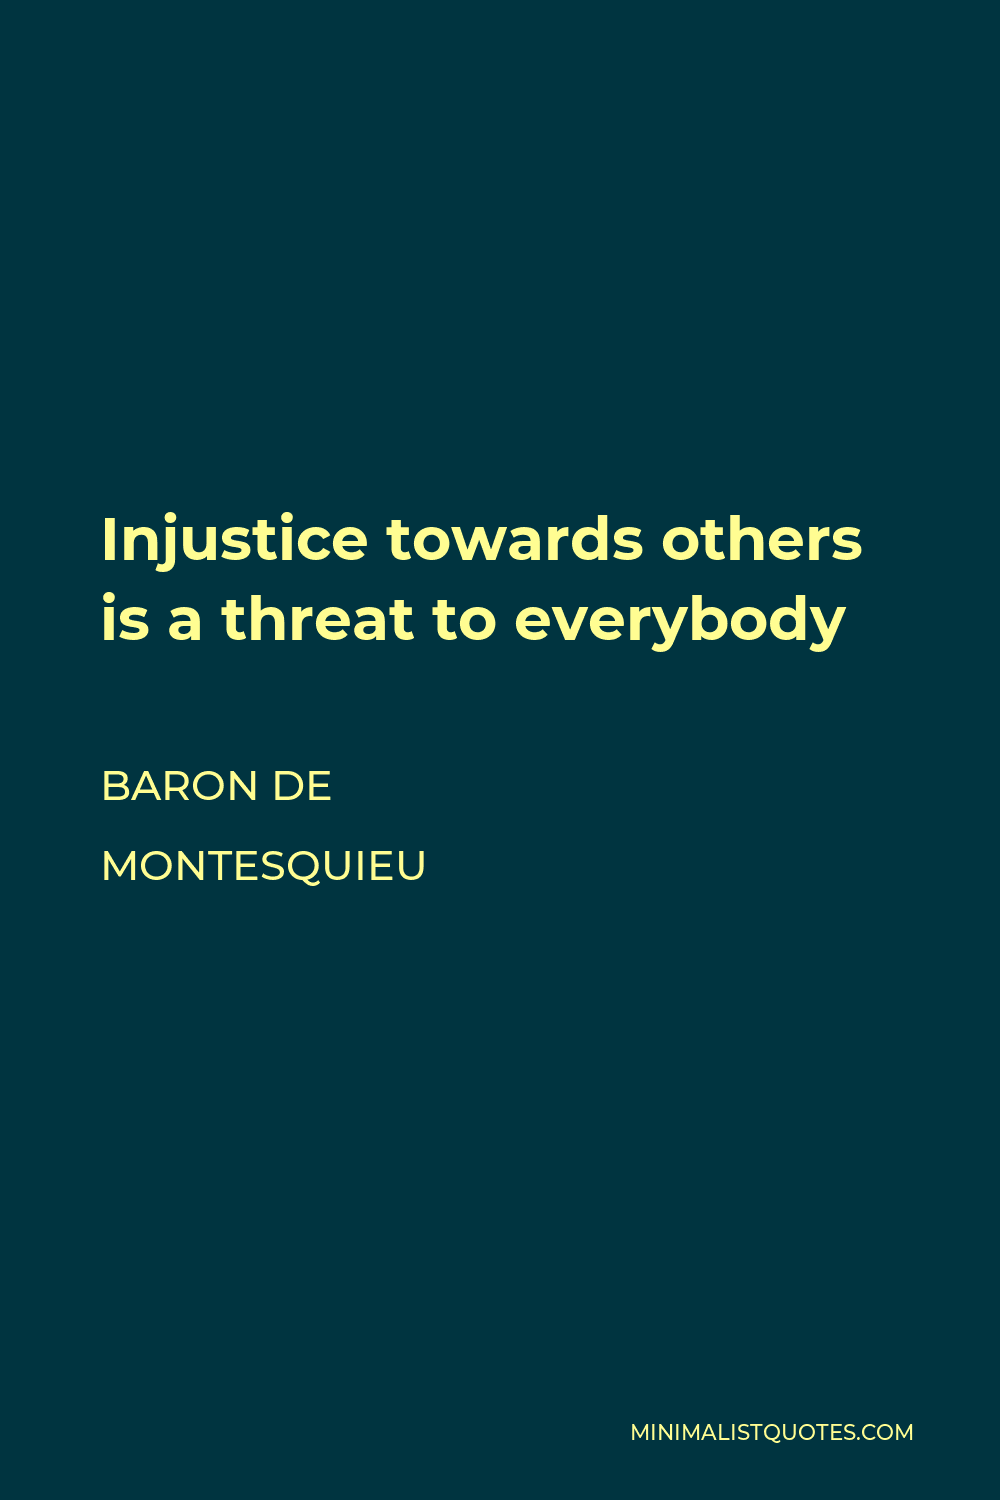 Baron de Montesquieu Quote - Injustice towards others is a threat to everybody